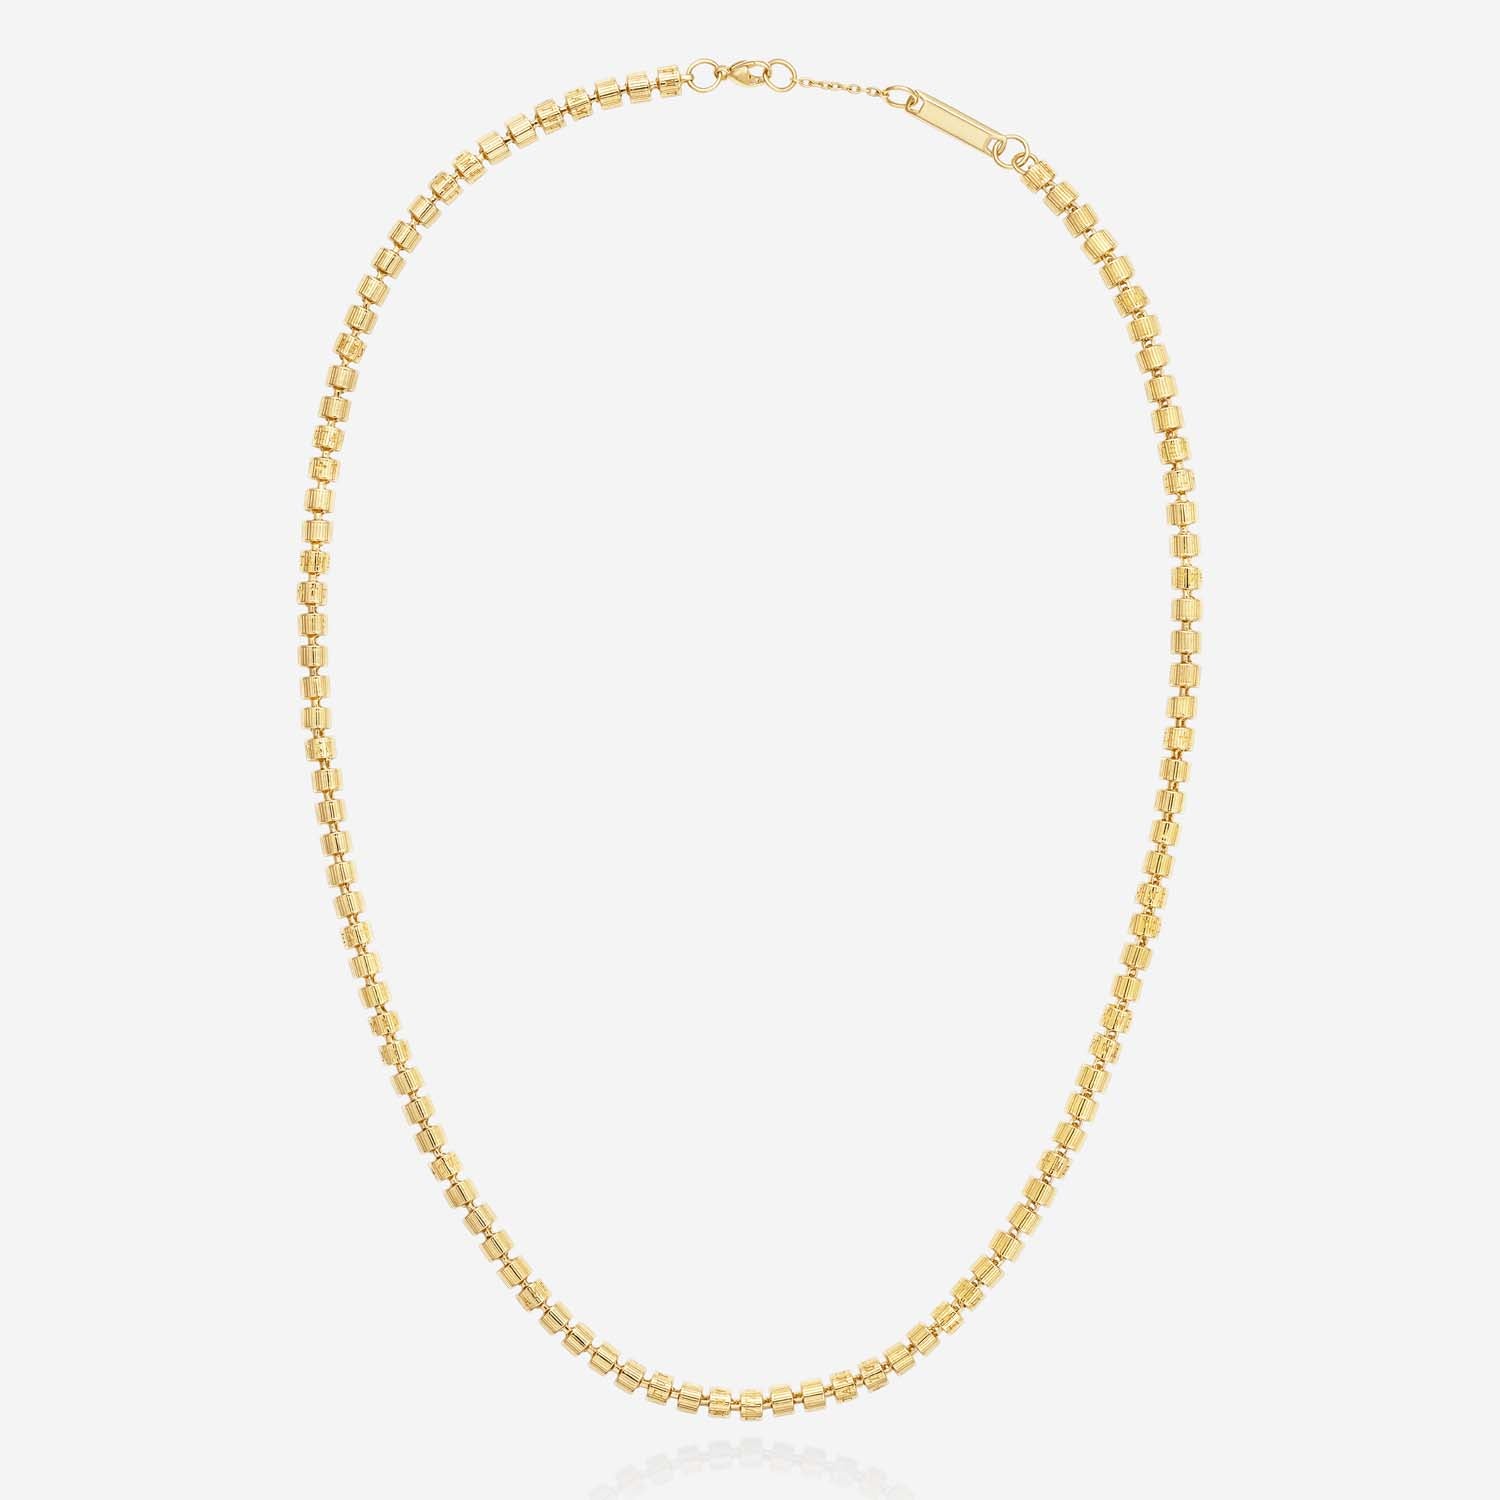 886 Royal Mint Necklaces Tutamen Stack Necklace 18ct Yellow Gold